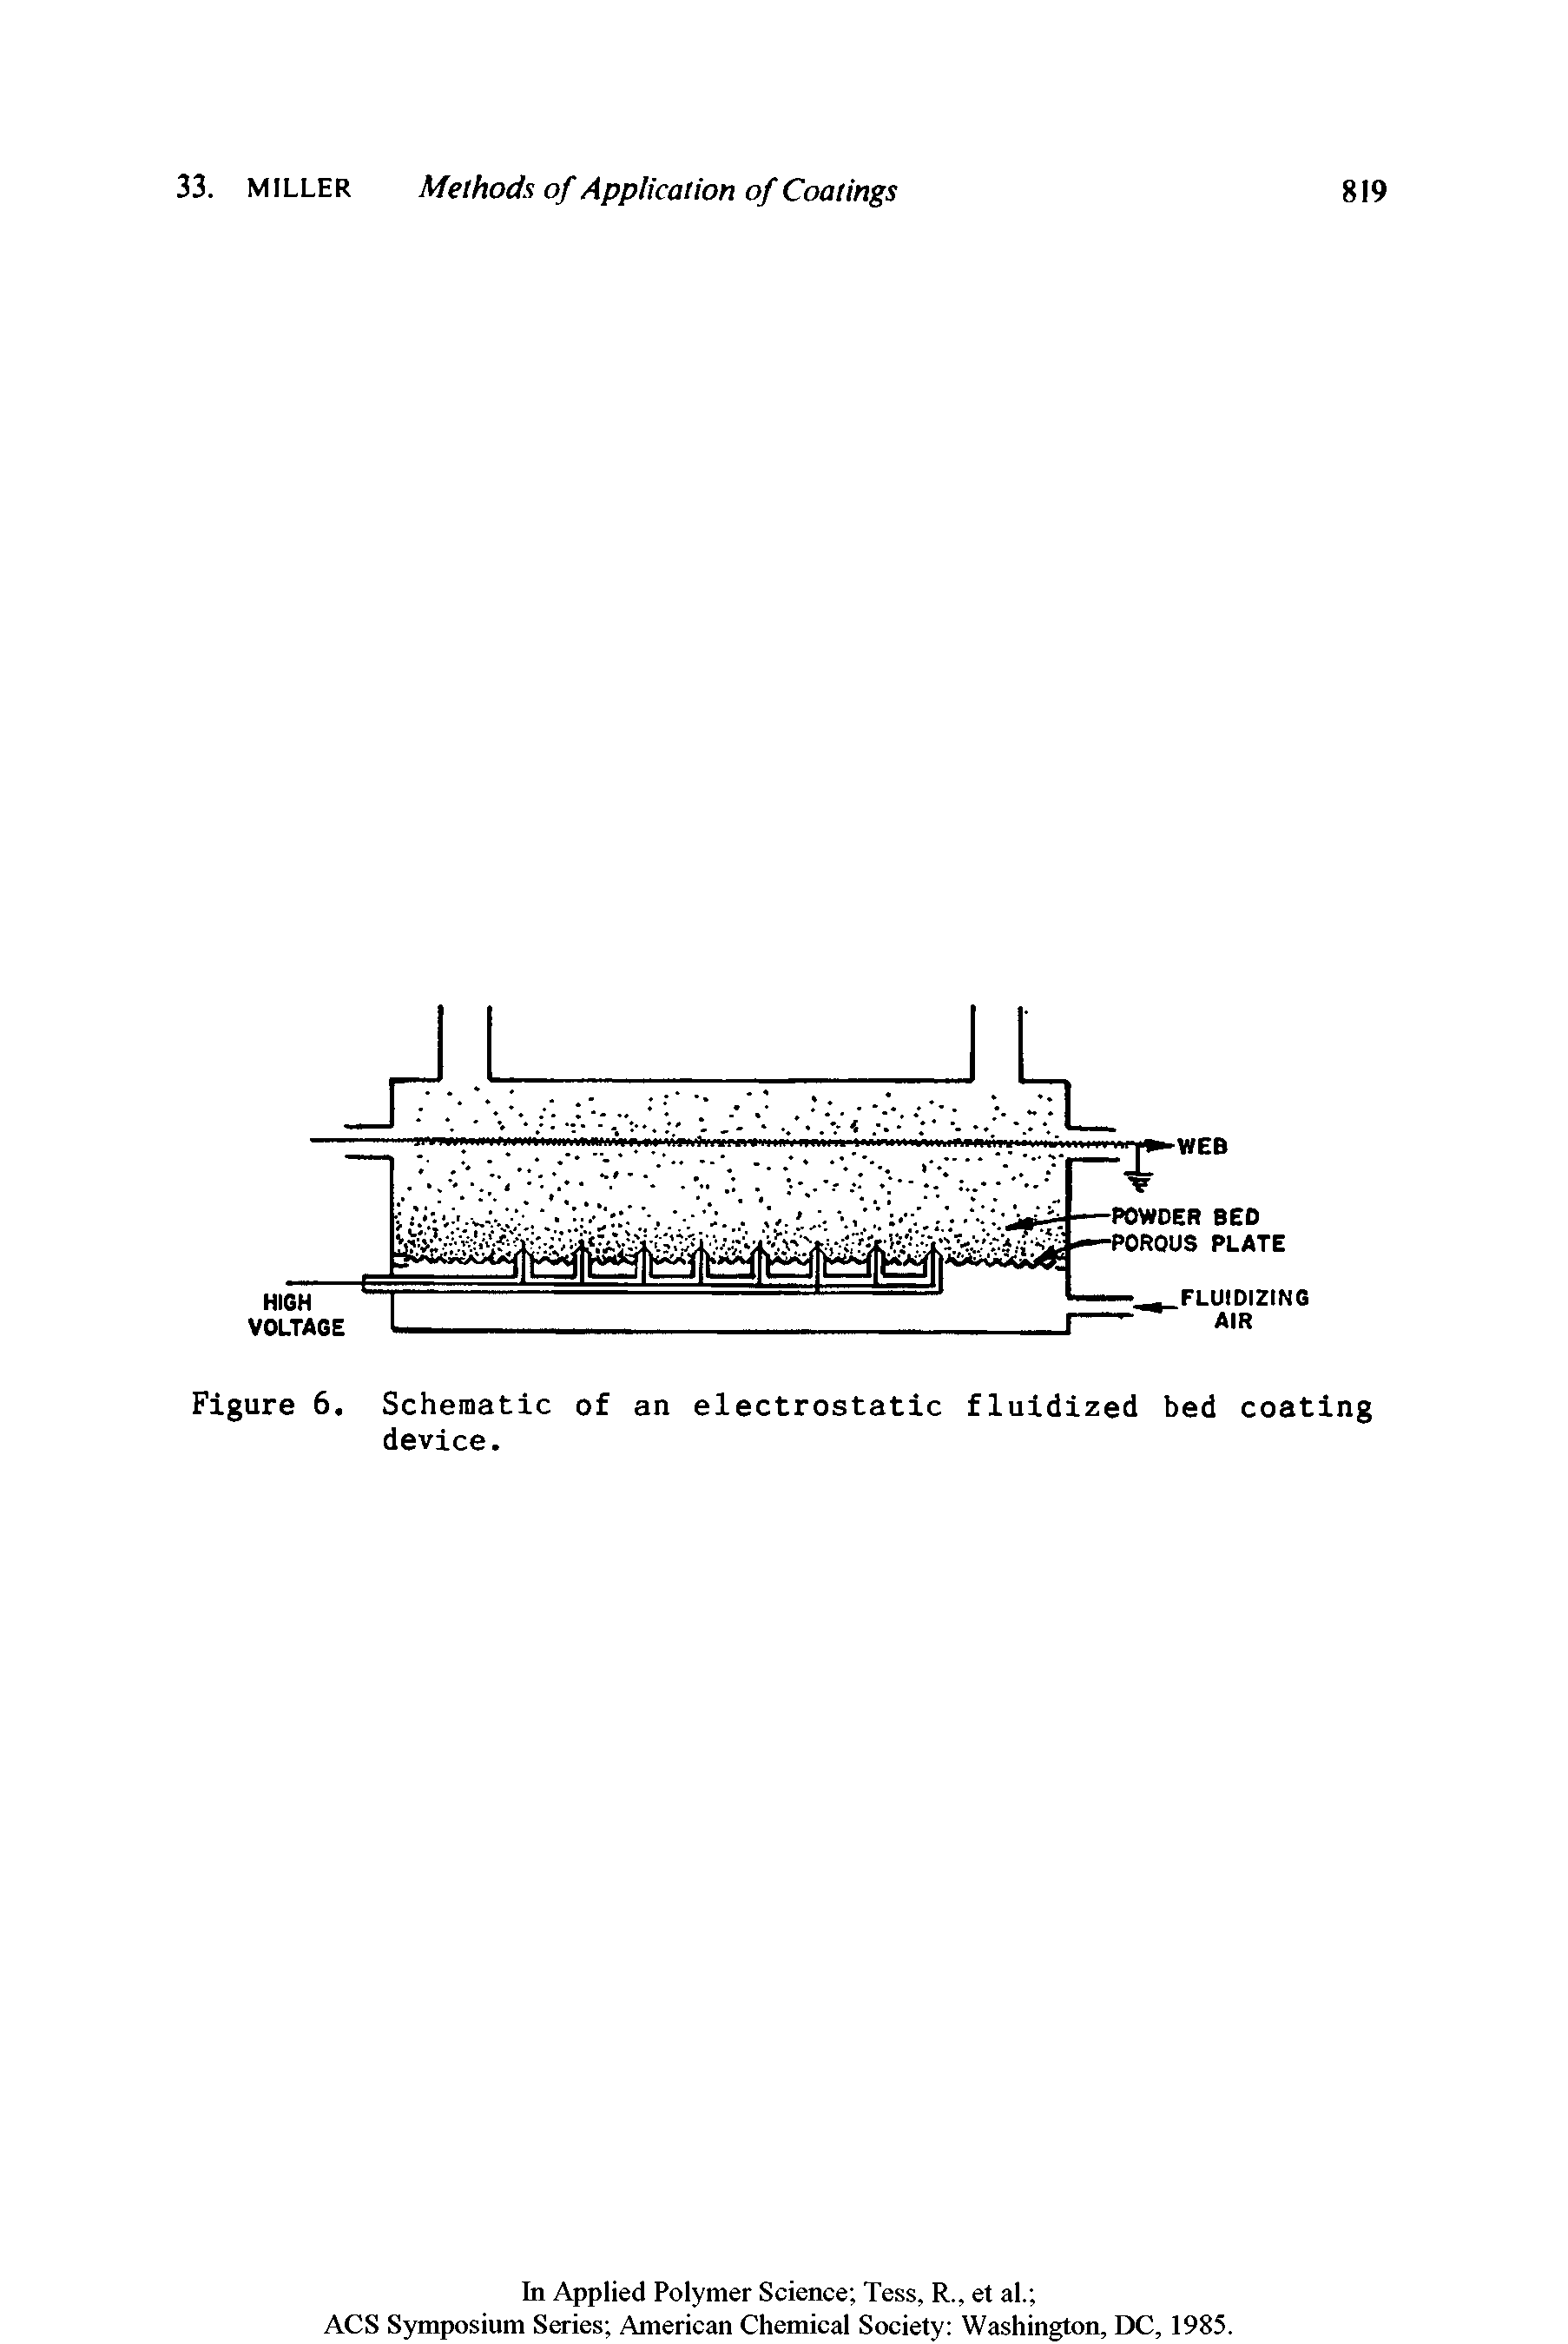 Figure 6. Schematic of an electrostatic fluidized bed coating device.